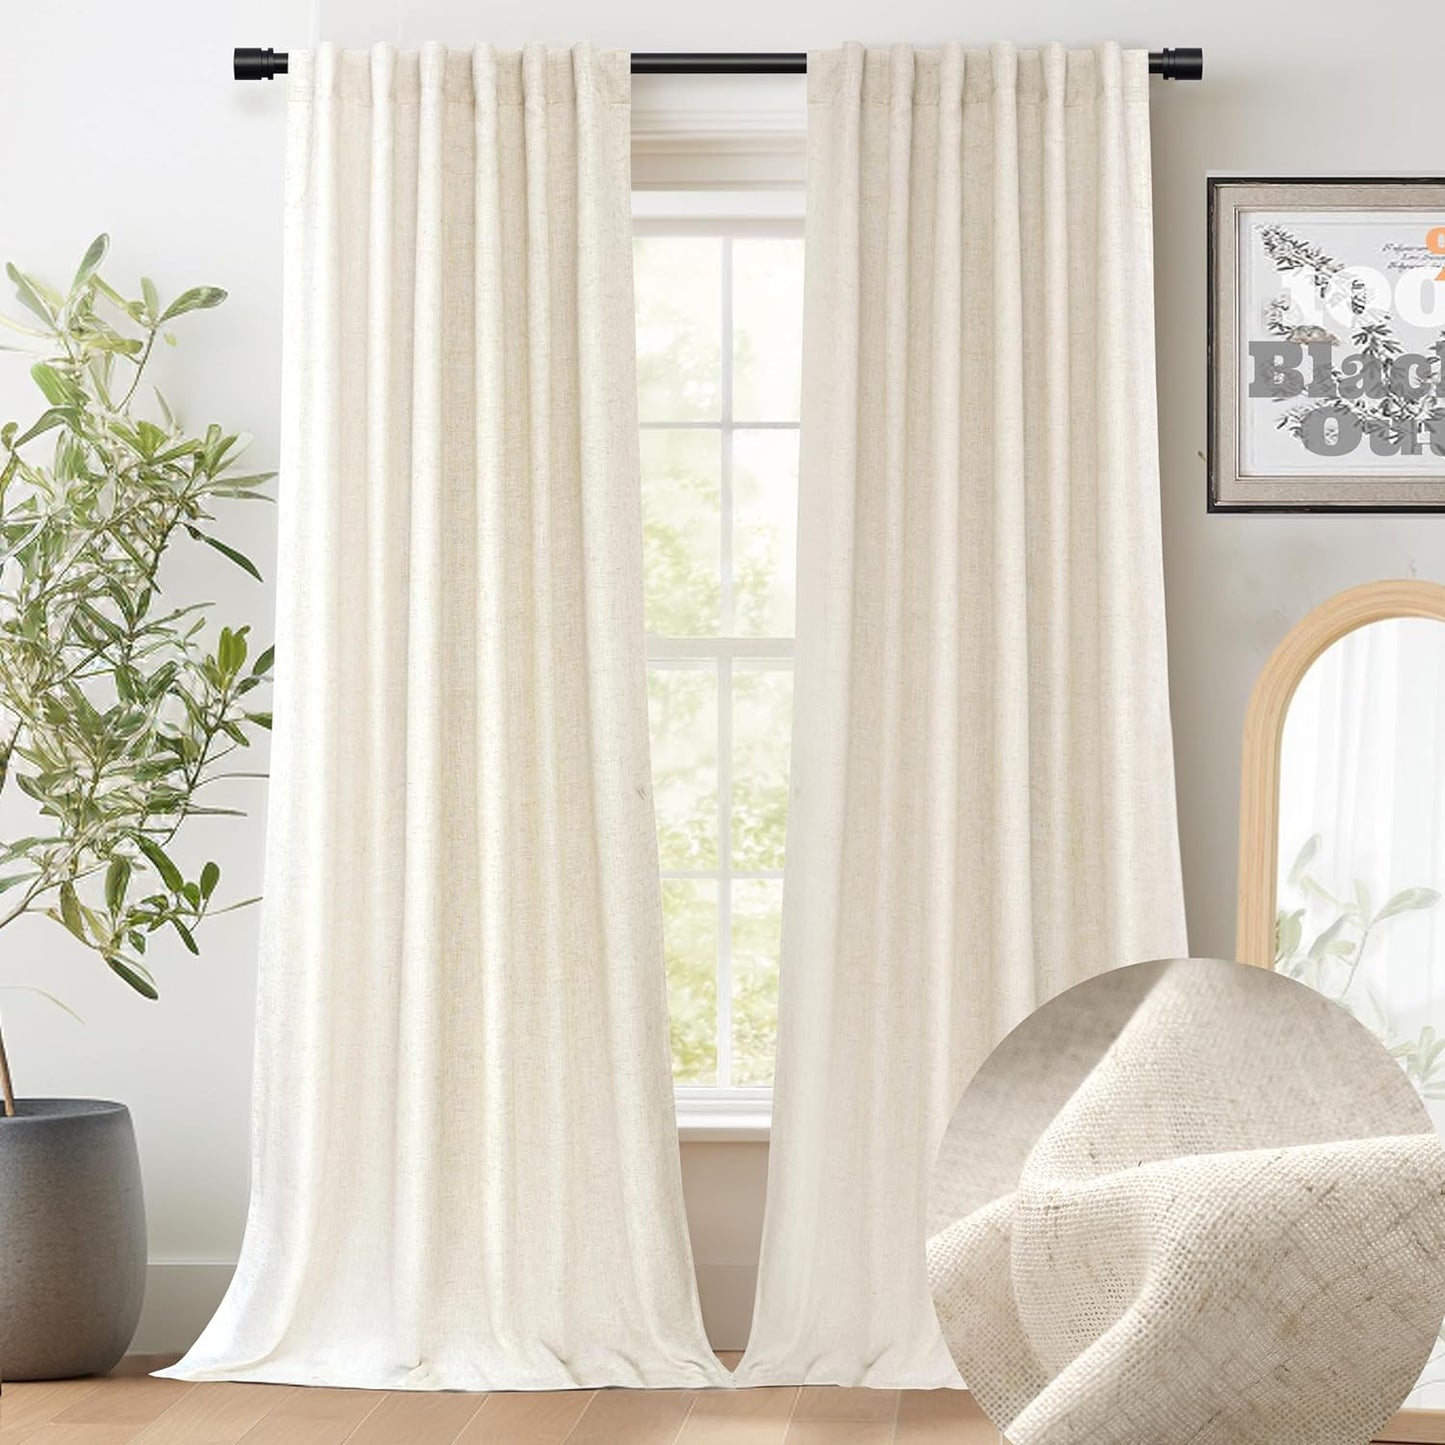 Driftaway 100% Blackout Natural Linen Curtains for Bedroom 96 Inches Long Double Layer Drape Farmhouse Thermal Insulated 3 Inch Rod Pocket Back Tab Full Light Blocking 2 Panels for Living Room Nursery  DriftAway Light Linen 52"X84" 